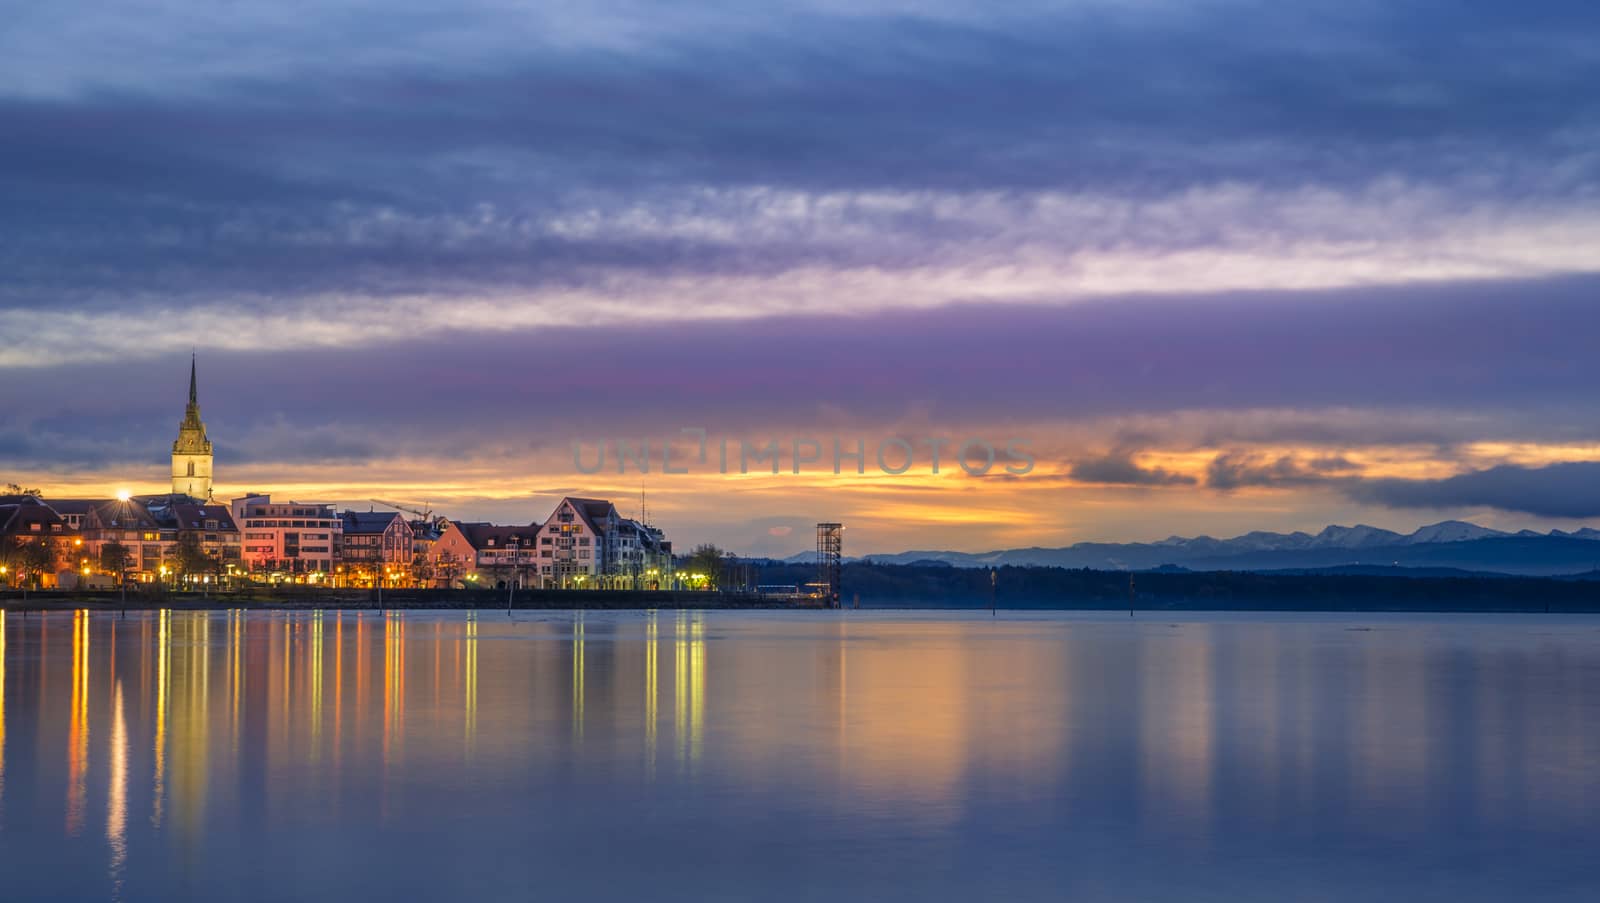 Sunrise over a town and a lake by YesPhotographers